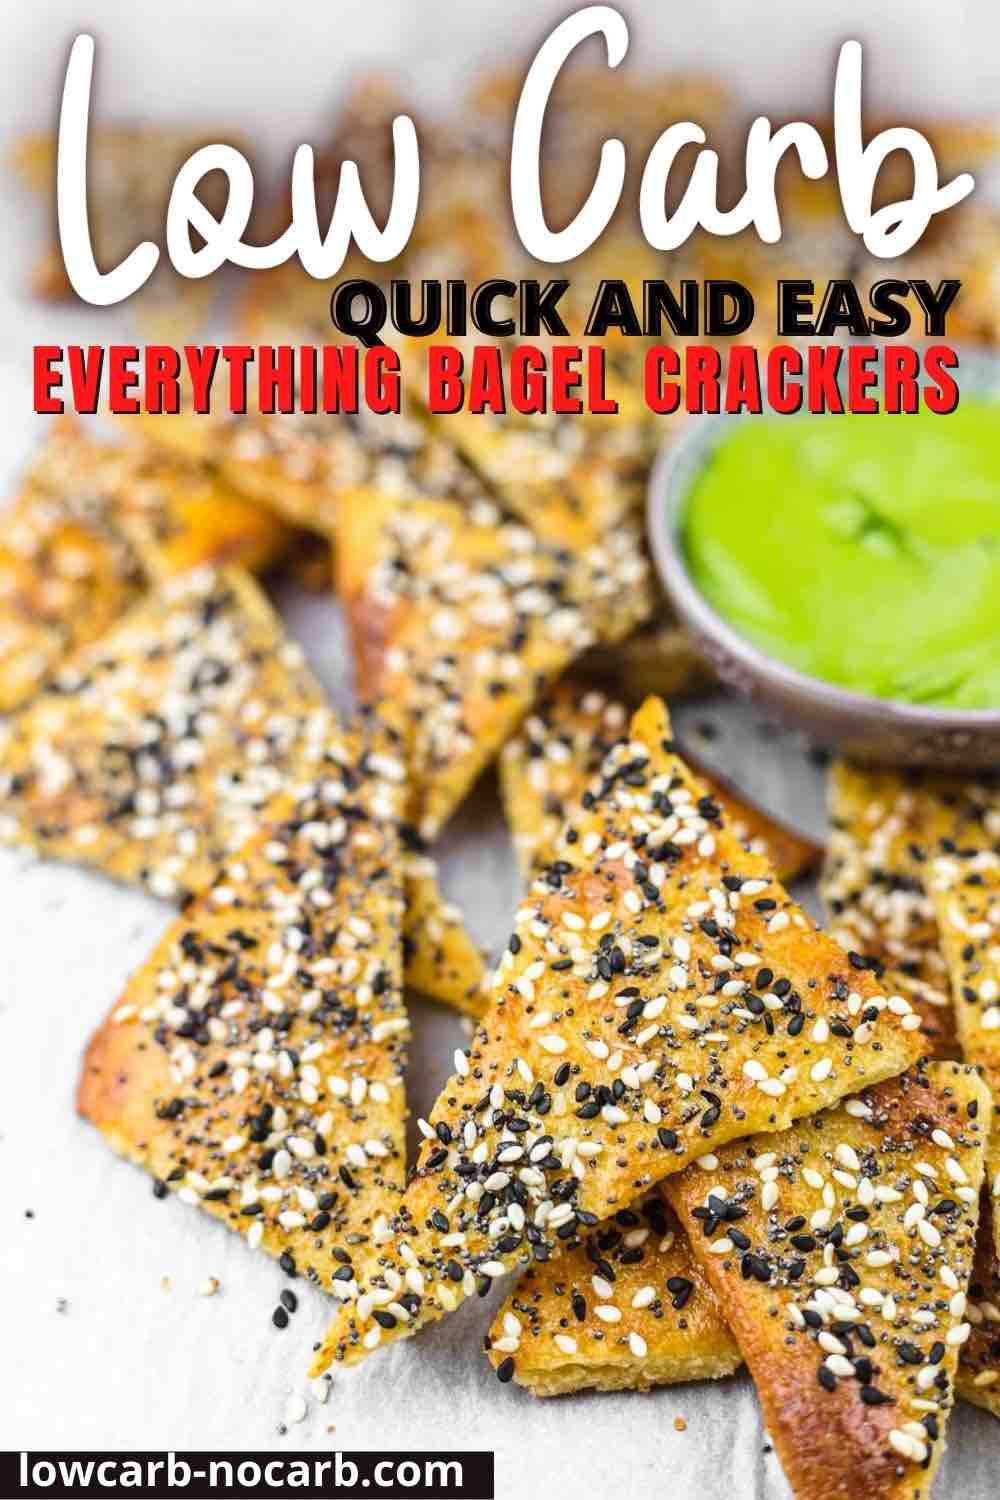 Keto Everything Bagel Crackers with sauce.